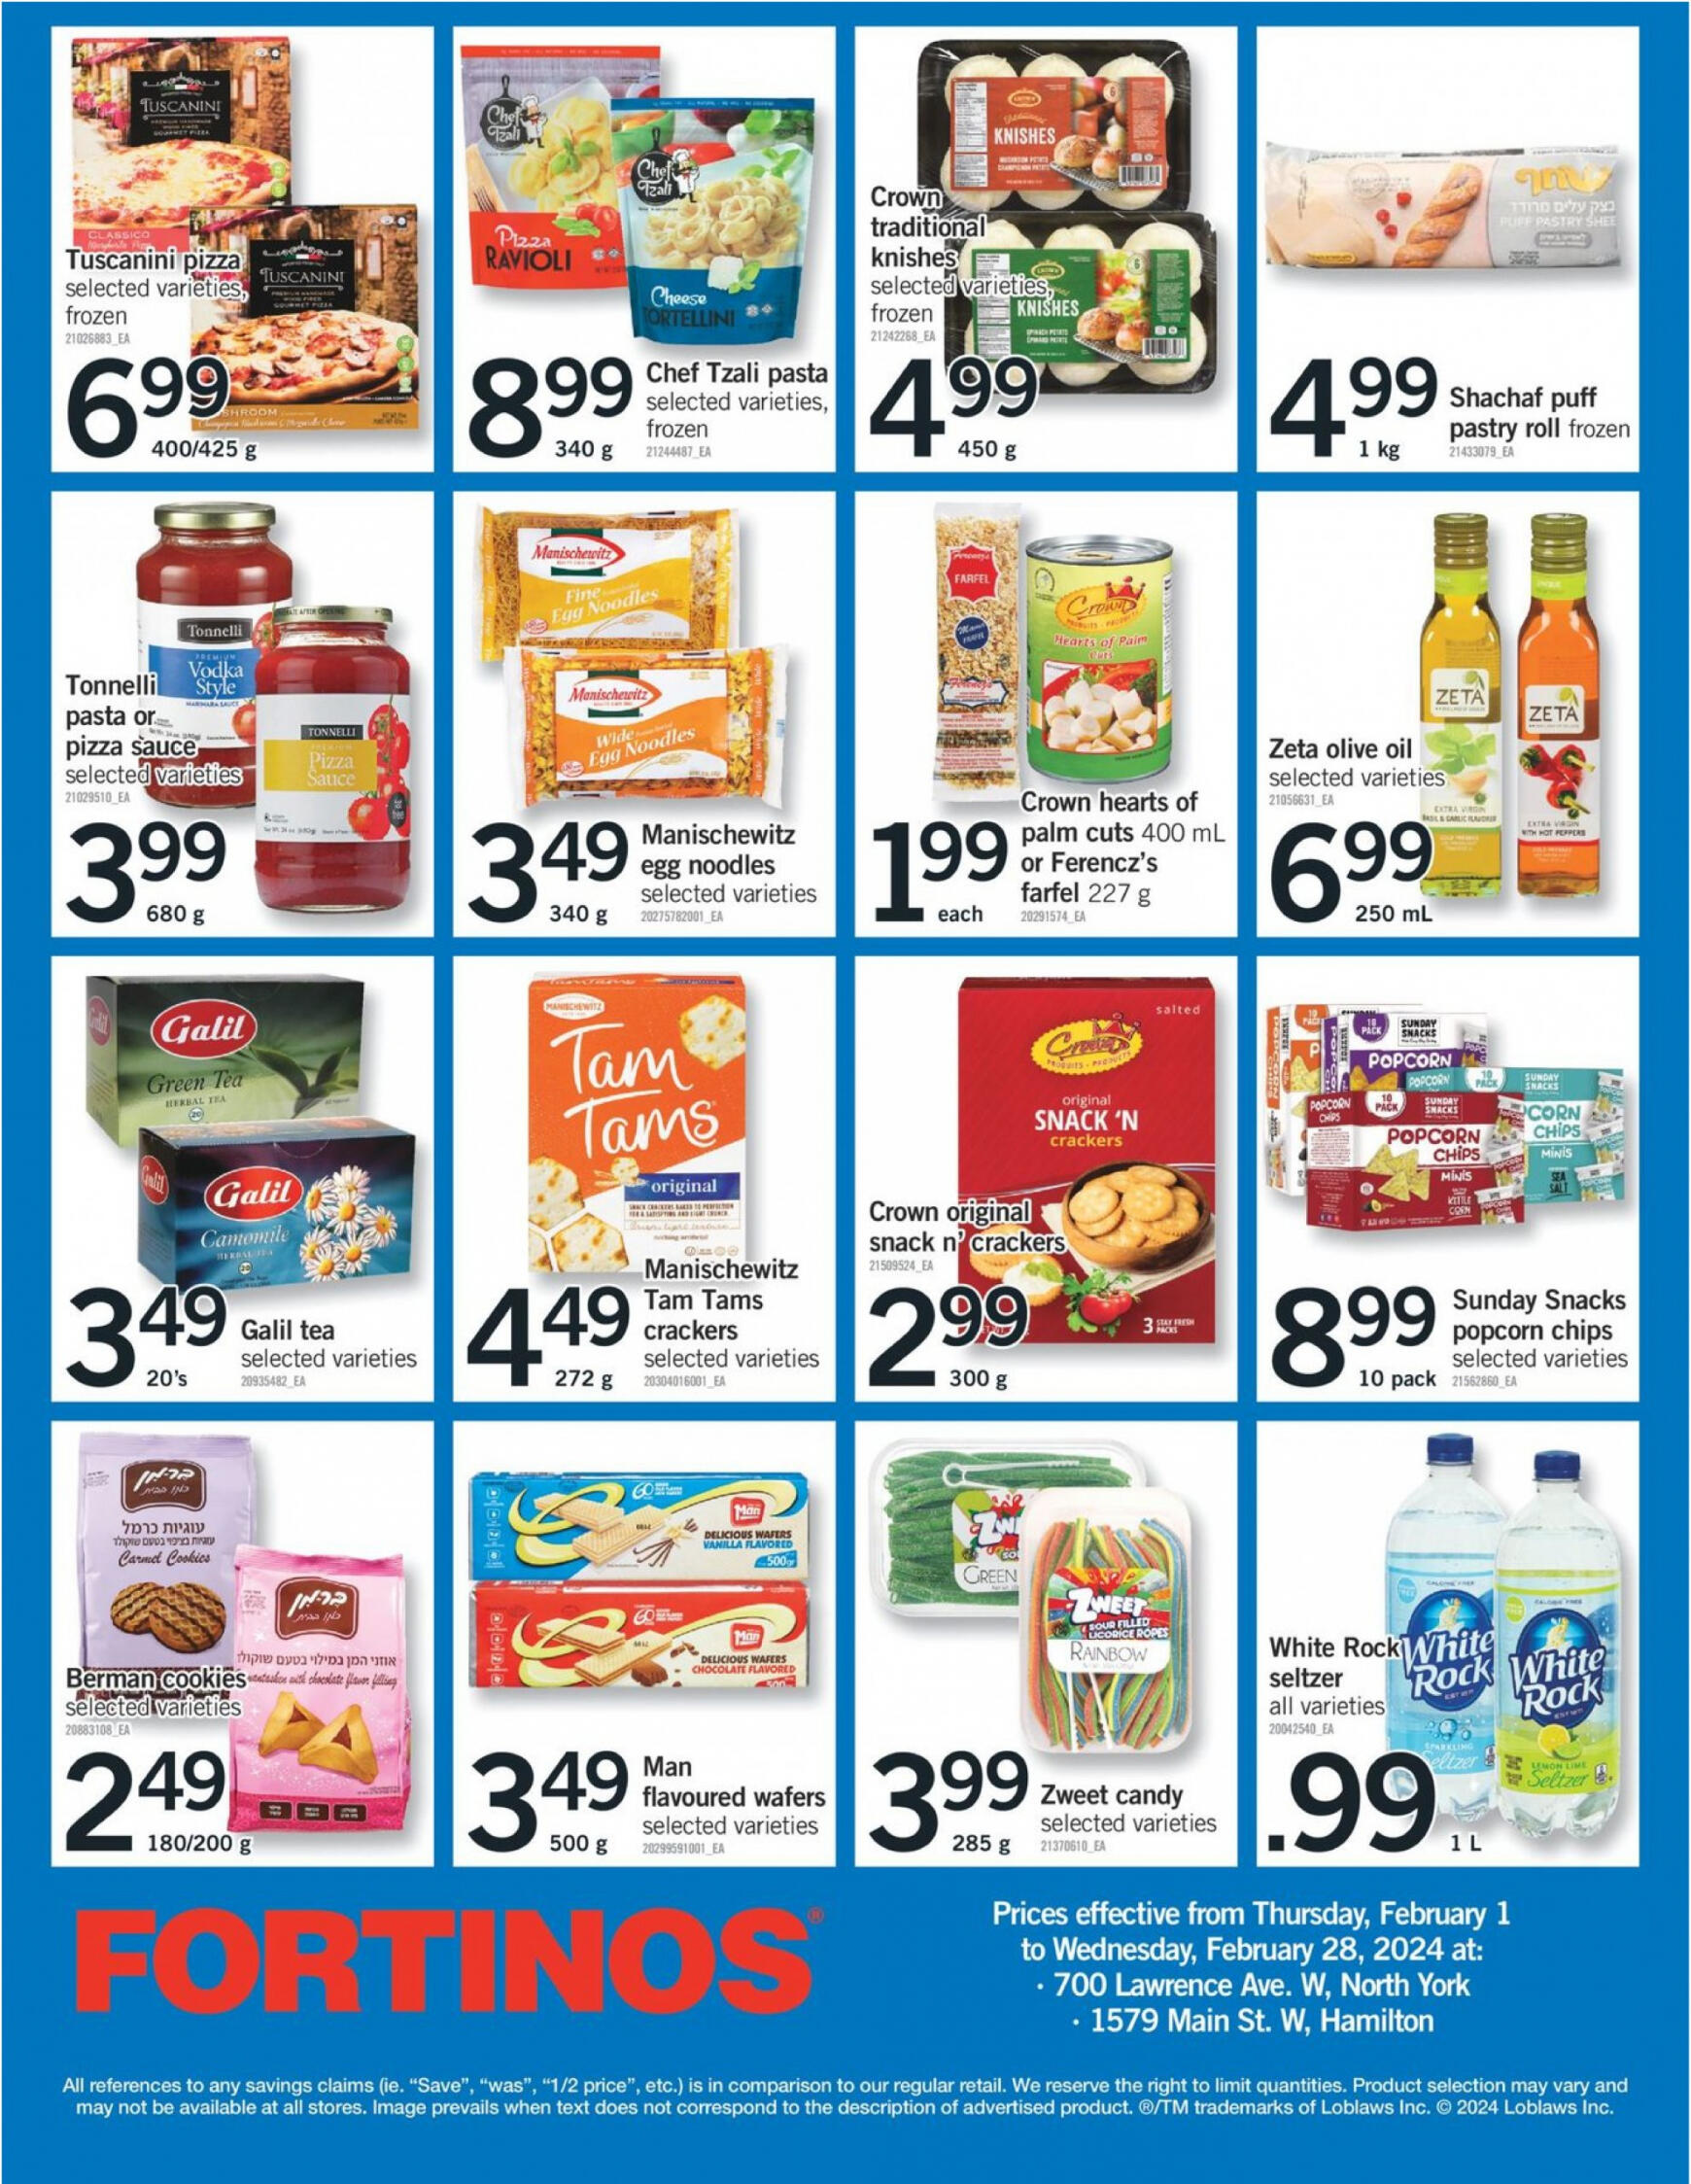 fortinos - Fortinos valid from 15.02.2024 - page: 23